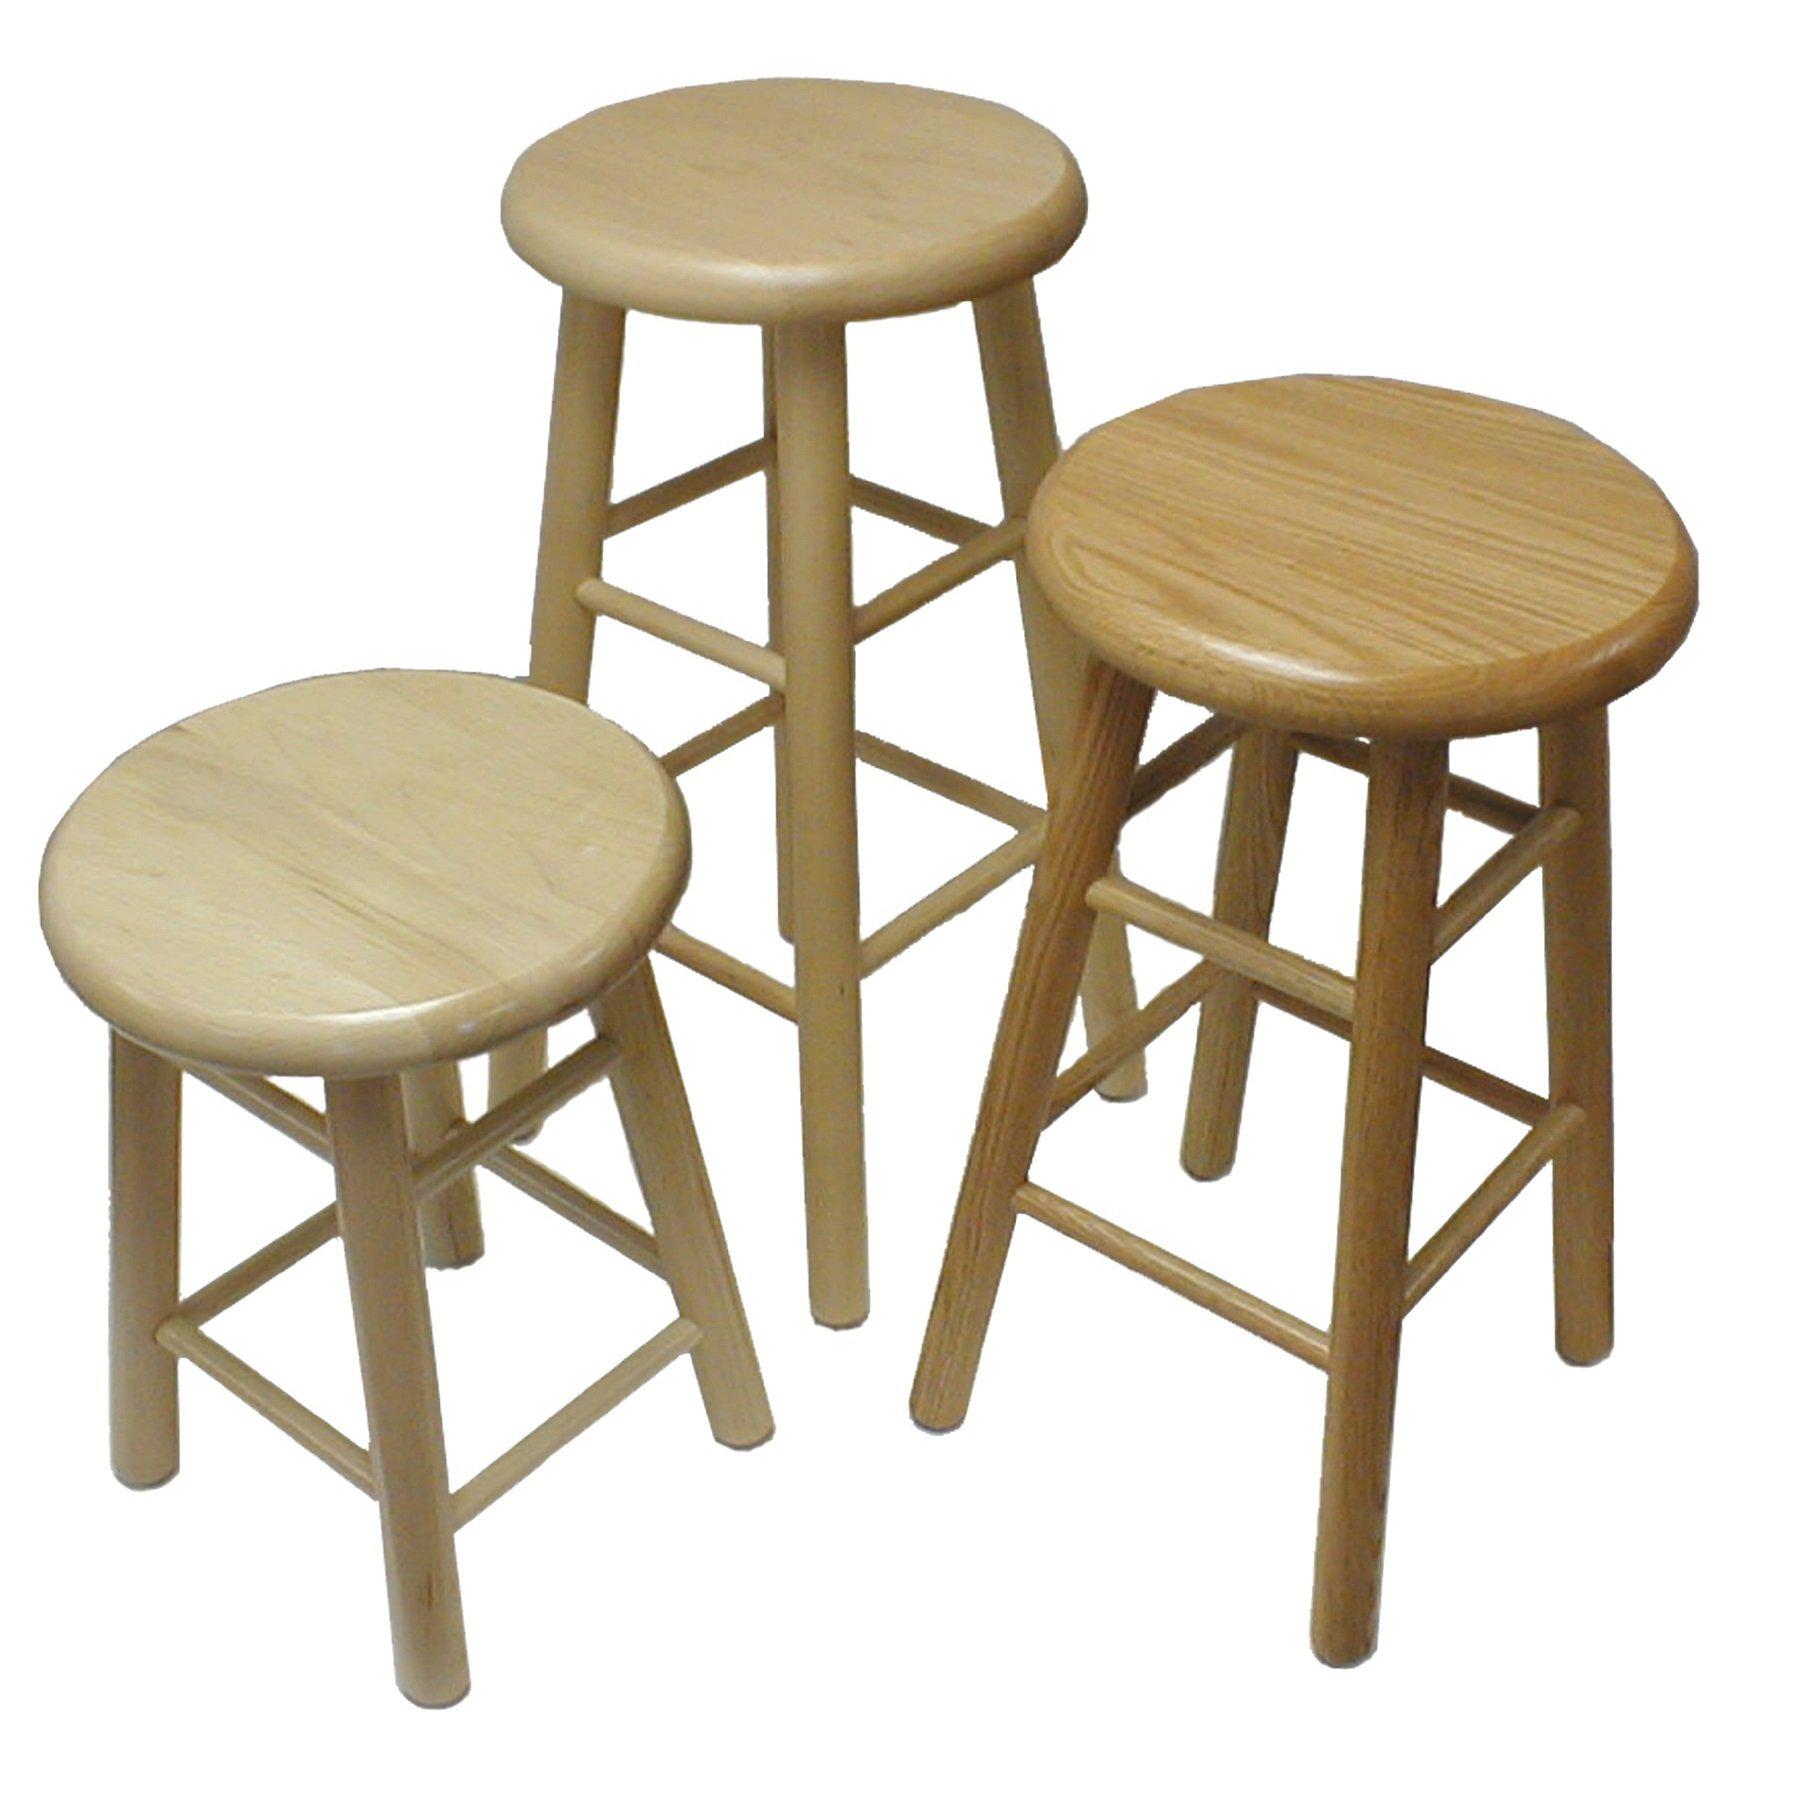 Solid Wood Stool, 30" High